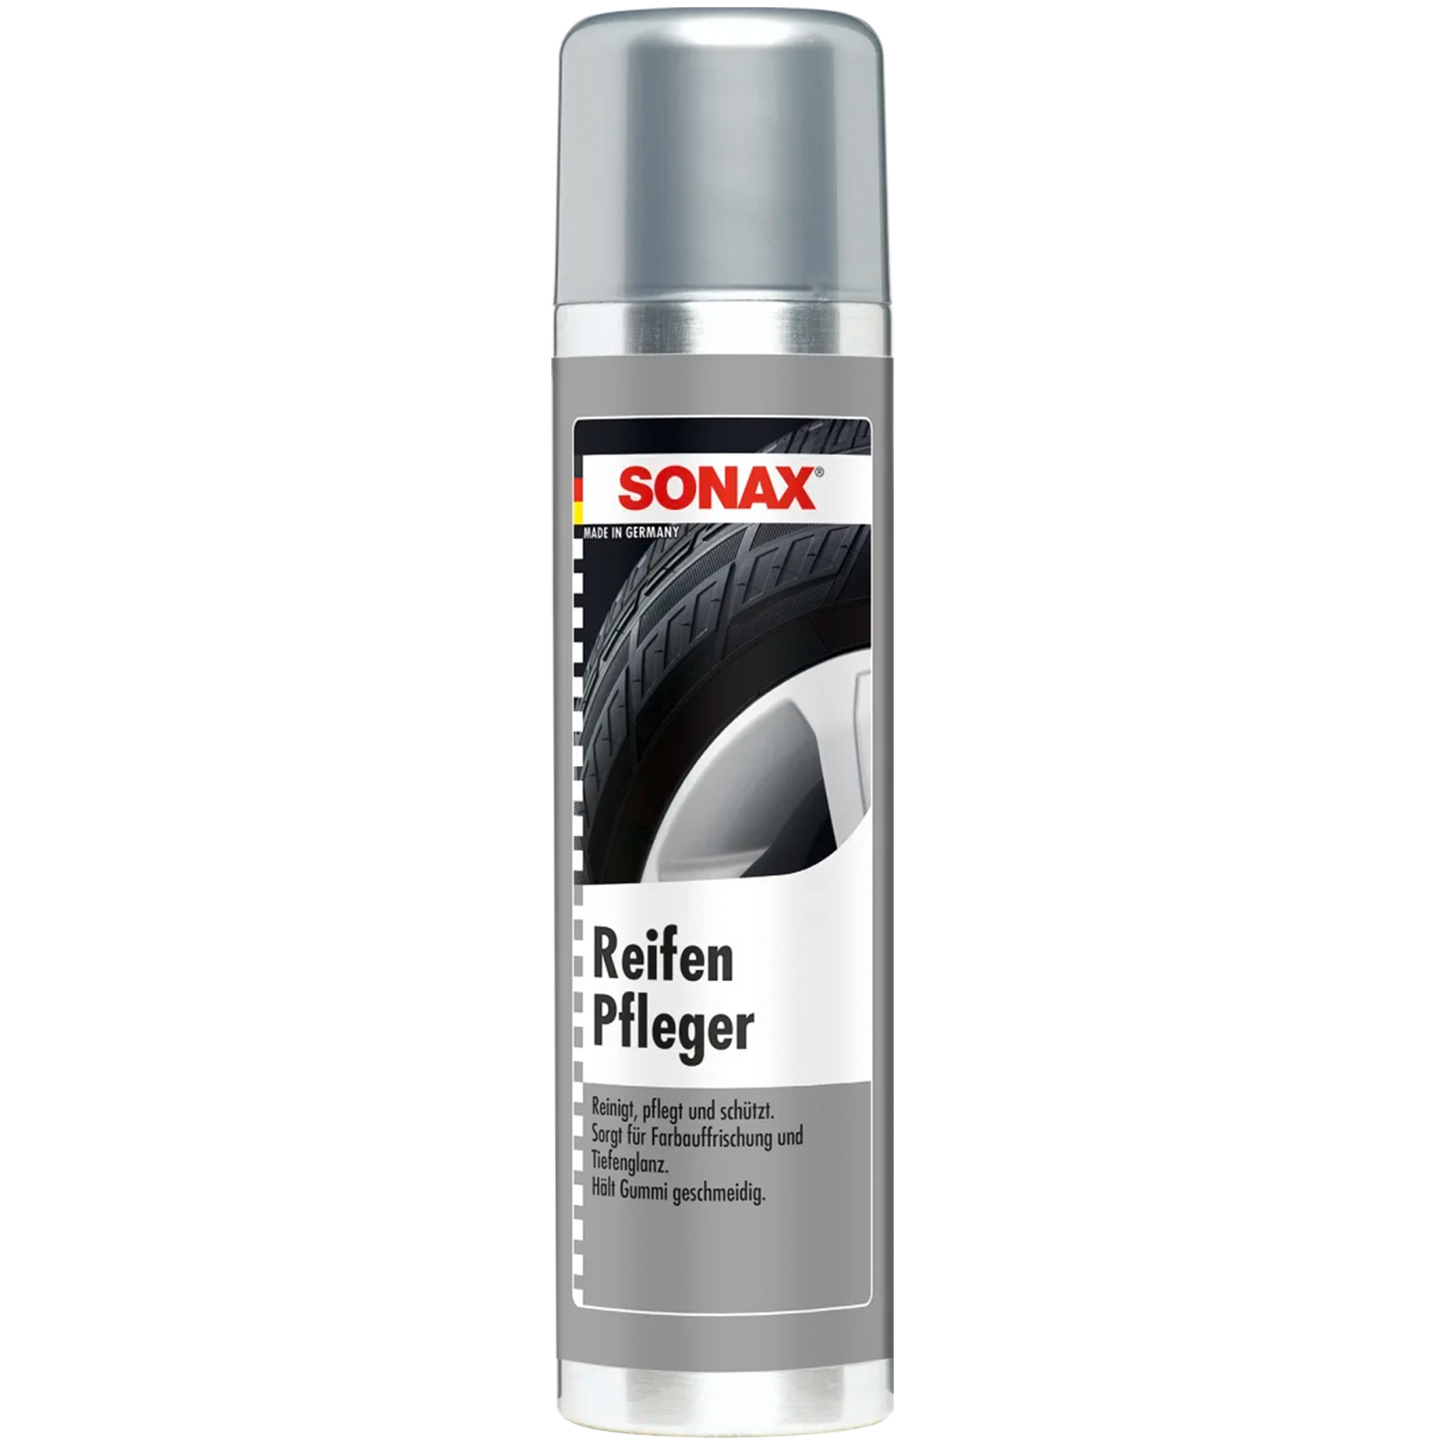 SONAX tire care product, 400ml